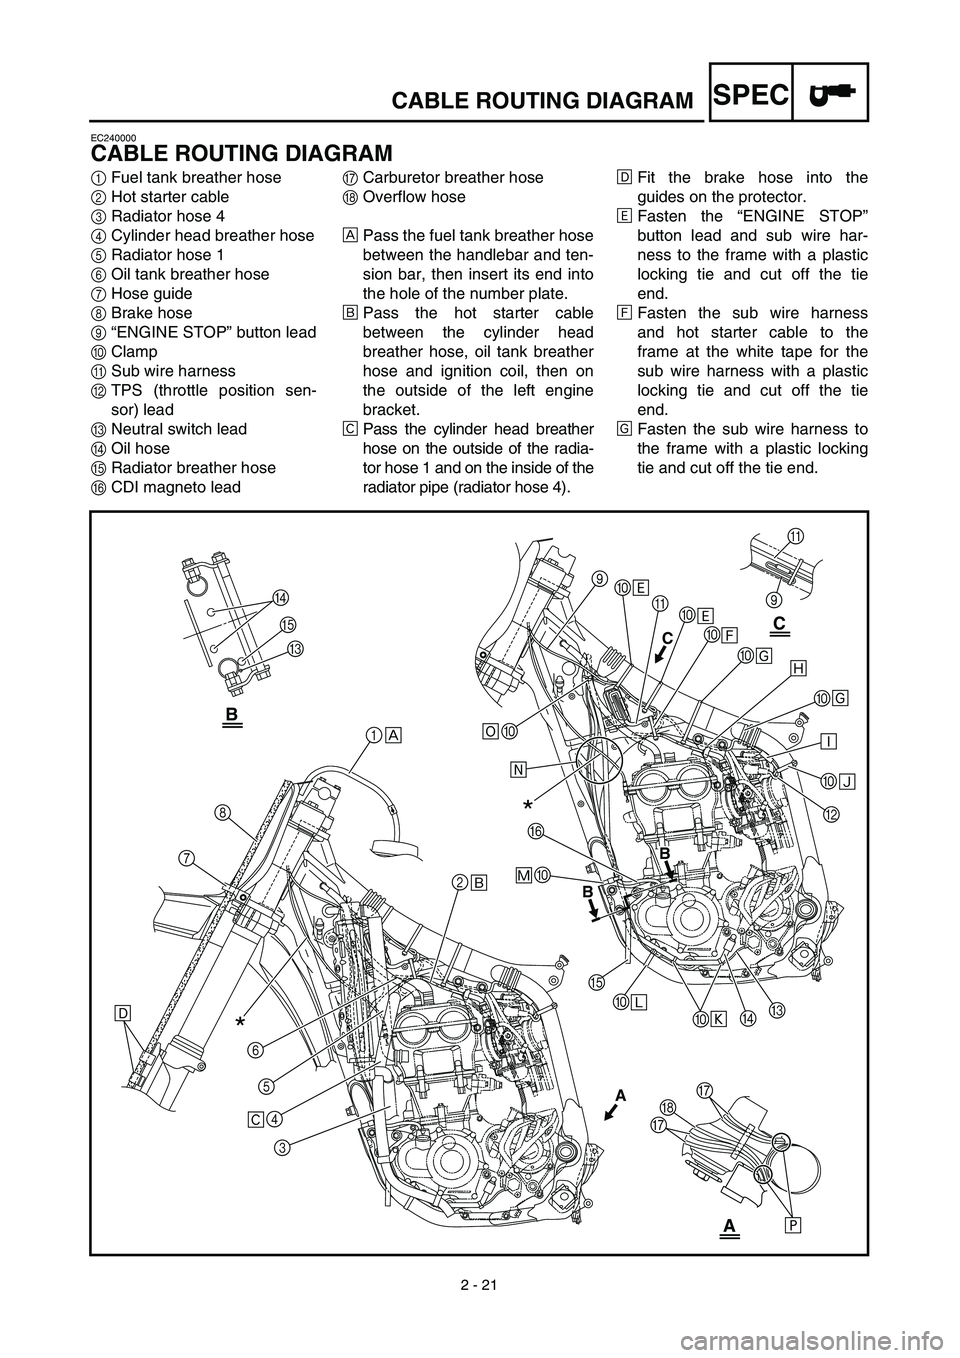 YAMAHA YZ450F 2003  Owners Manual  
2 - 21
SPEC
 
CABLE ROUTING DIAGRAM 
EC240000 
CABLE ROUTING DIAGRAM 
1 
Fuel tank breather hose 
2 
Hot starter cable 
3 
Radiator hose 4 
4 
Cylinder head breather hose 
5 
Radiator hose 1 
6 
Oil